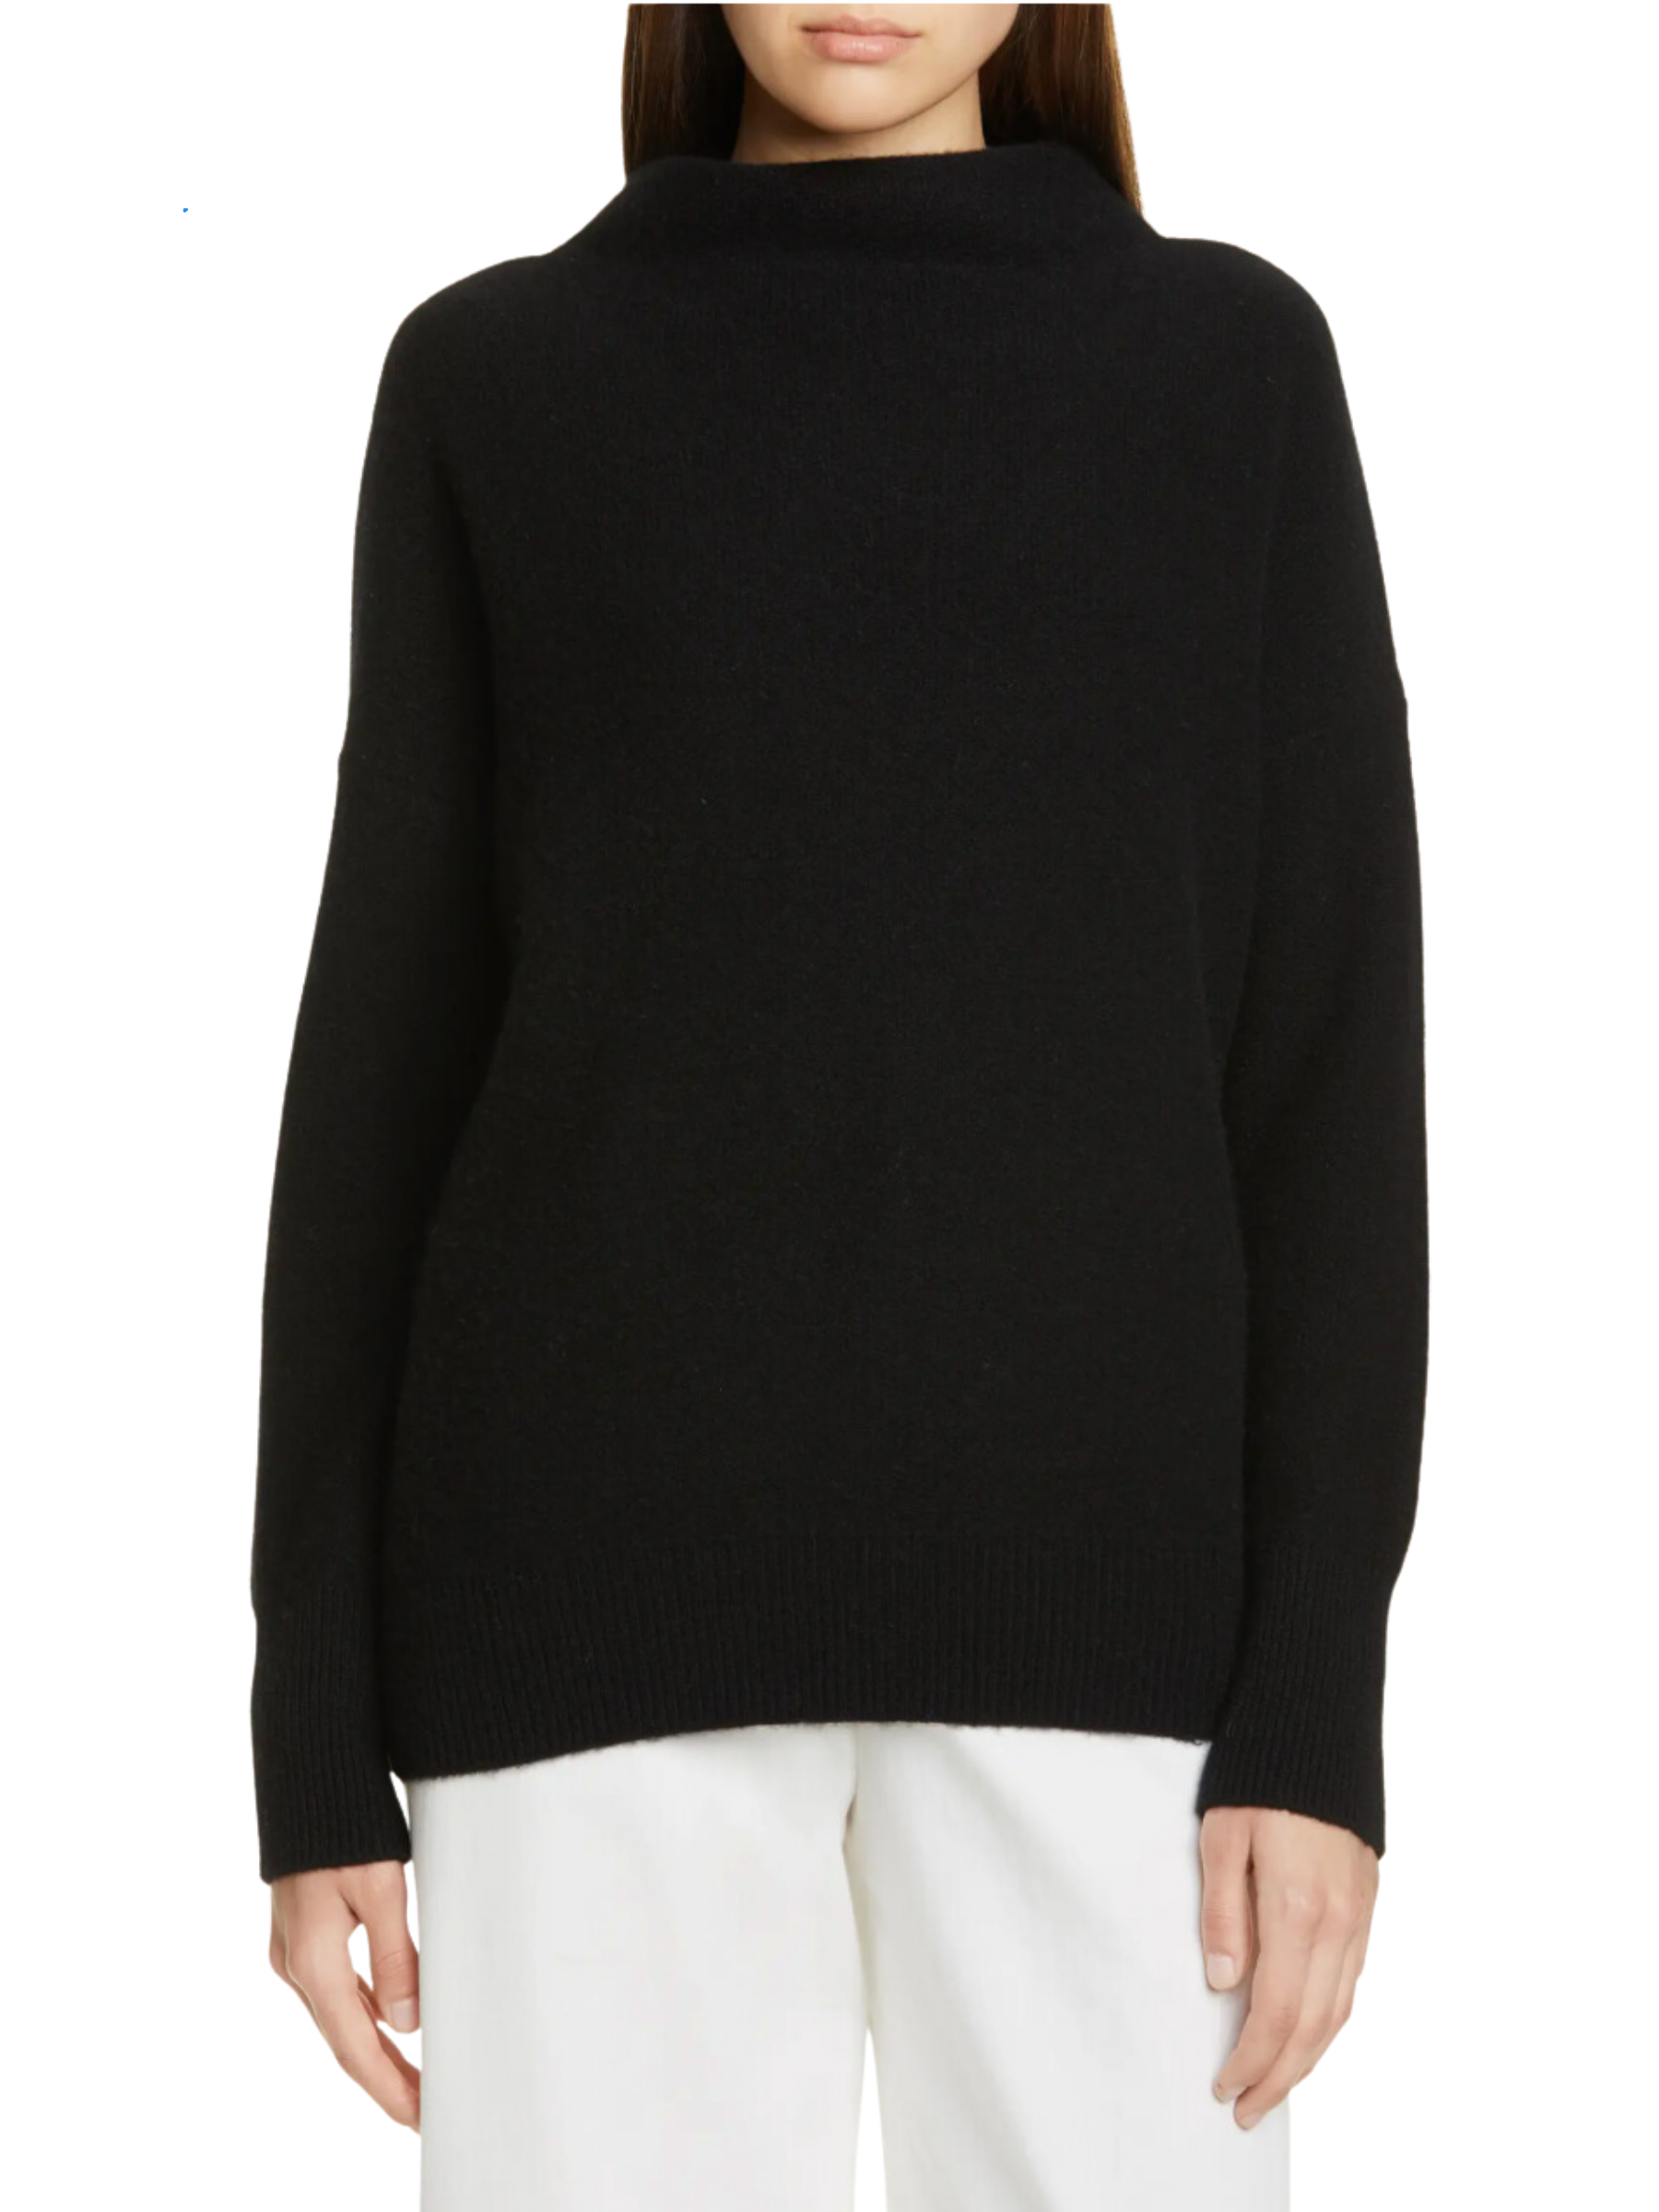 19 Best Cashmere Sweaters That Are Absolutely Worth It